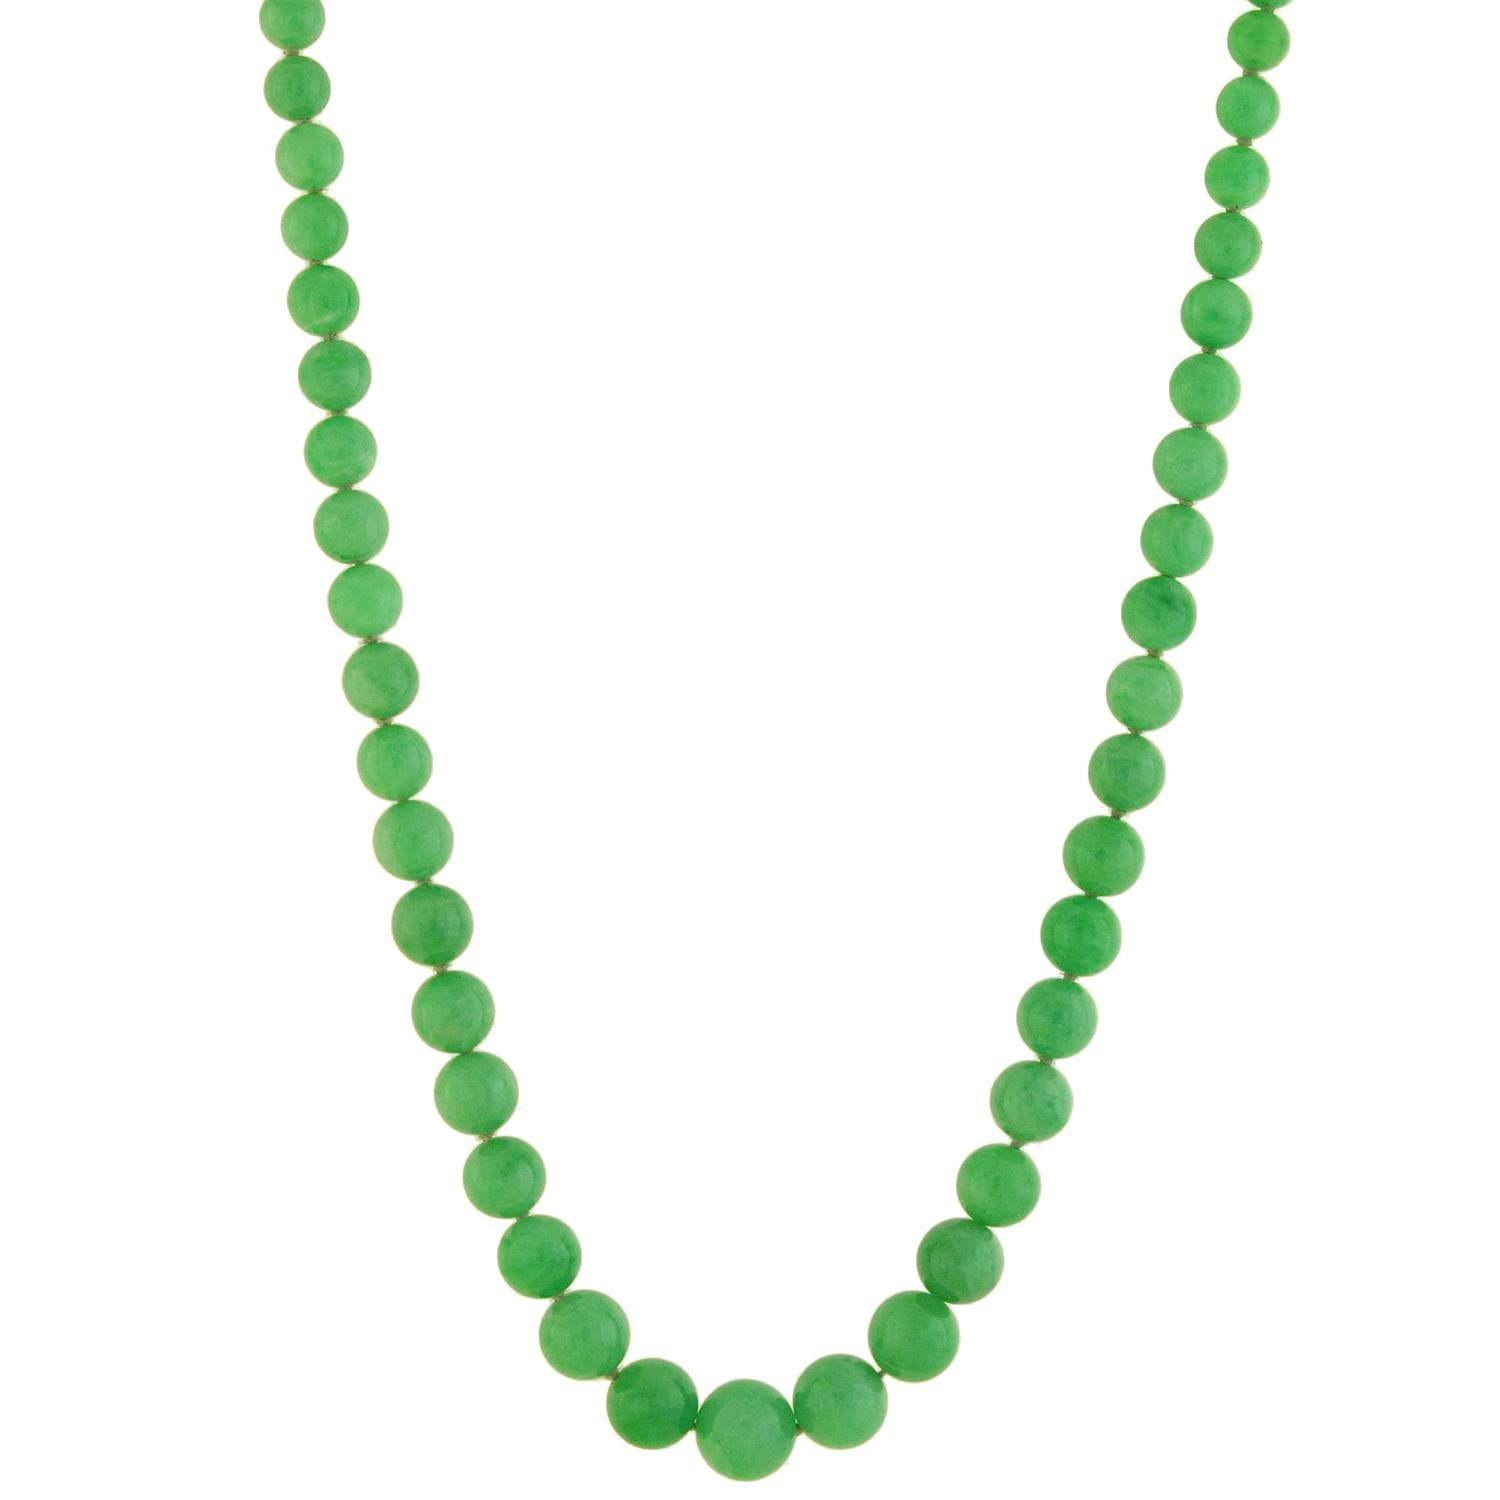 A stunning jadeite necklace from the Edwardian (ca1910) era! This high quality piece features a strand of 139 natural jadeite beads, which meet at a gorgeous platinum and diamond clasp. The jadeite has simply beautiful coloring, displaying a lovely